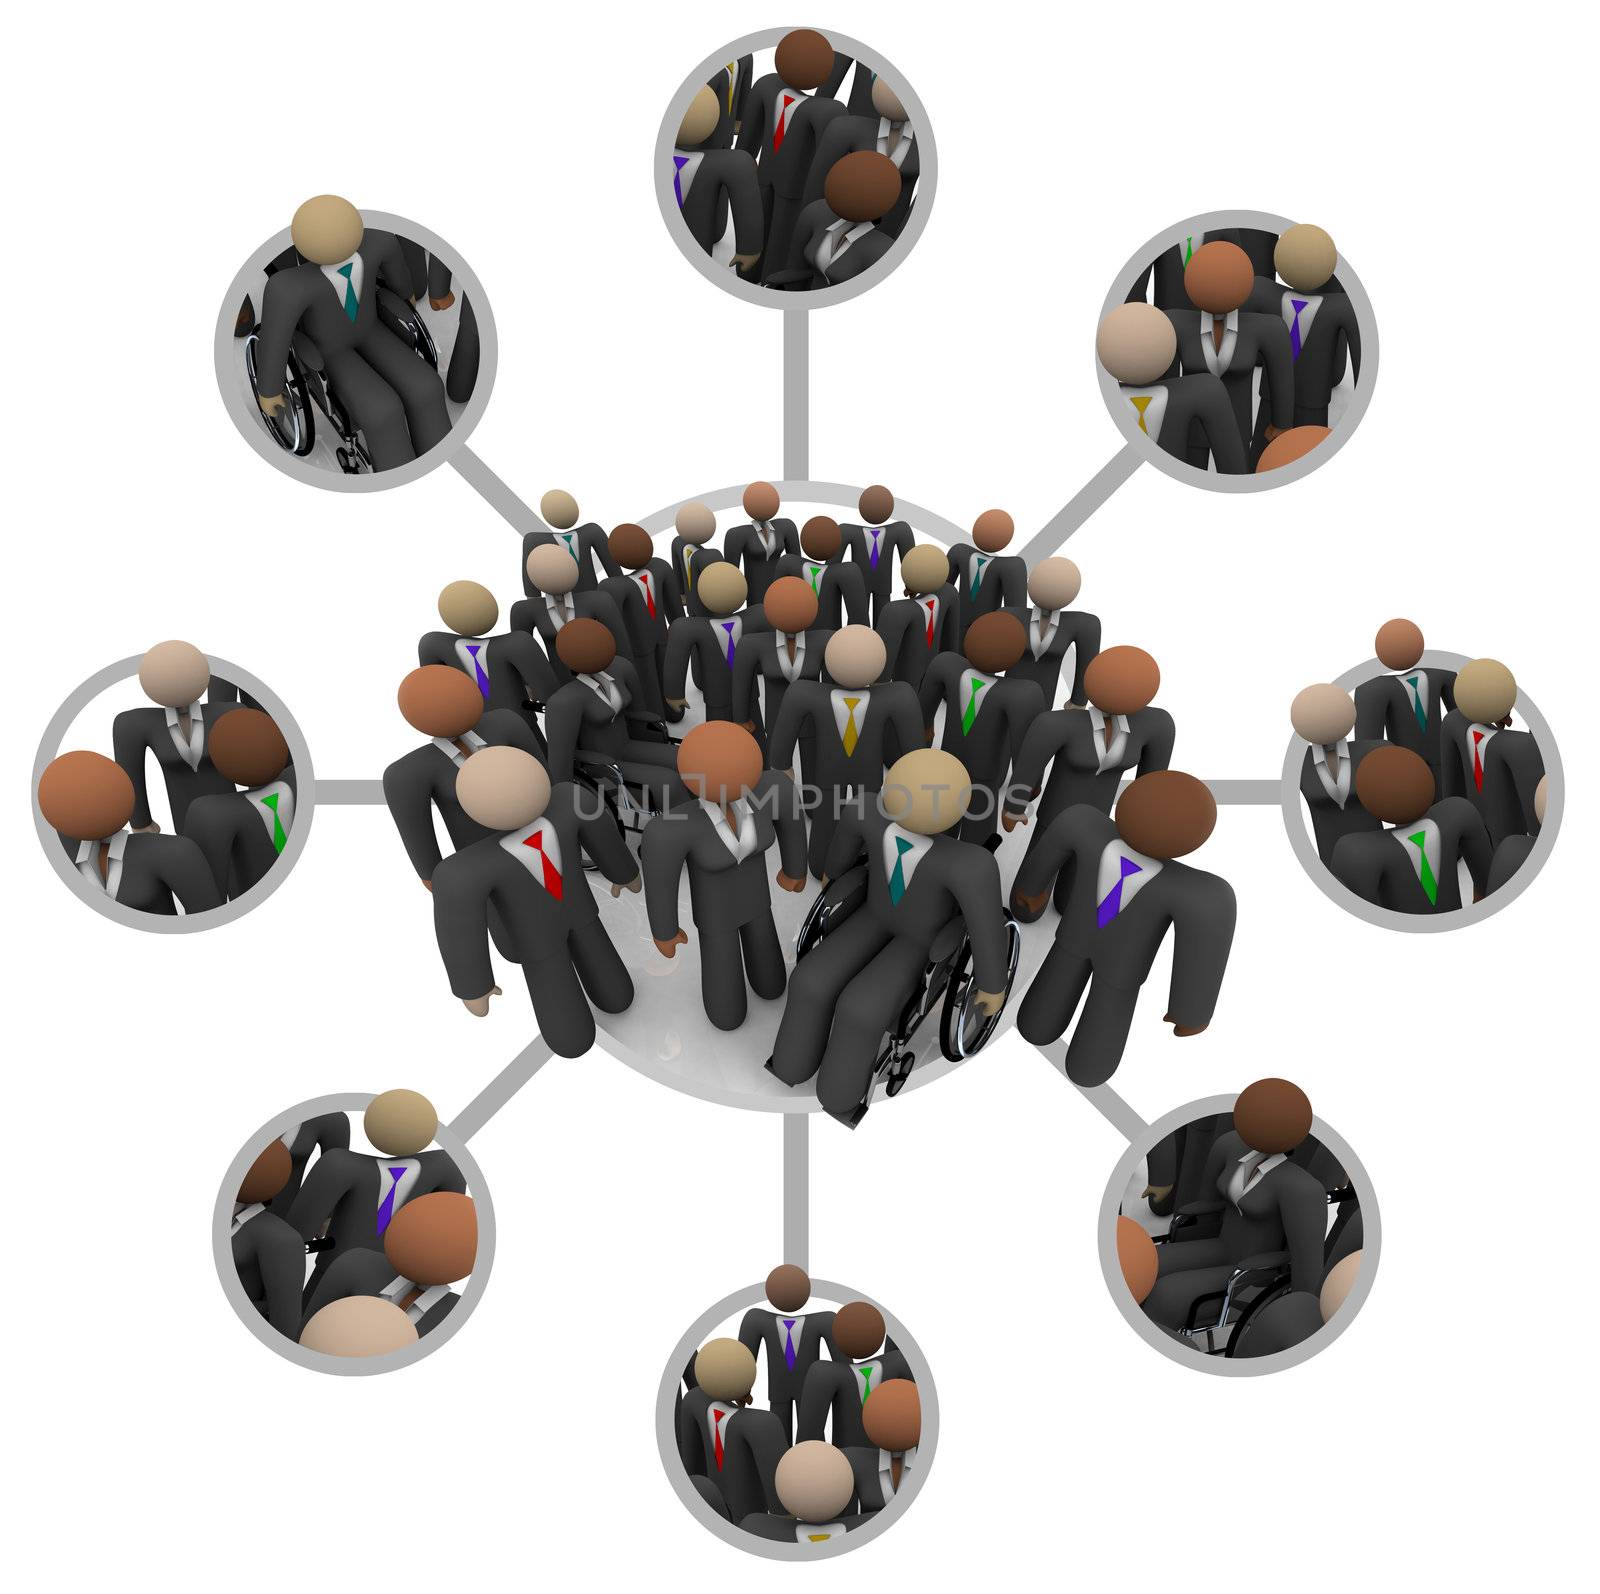 Many people of different races in business suits connected by links in a communication networking grid representing professional networking